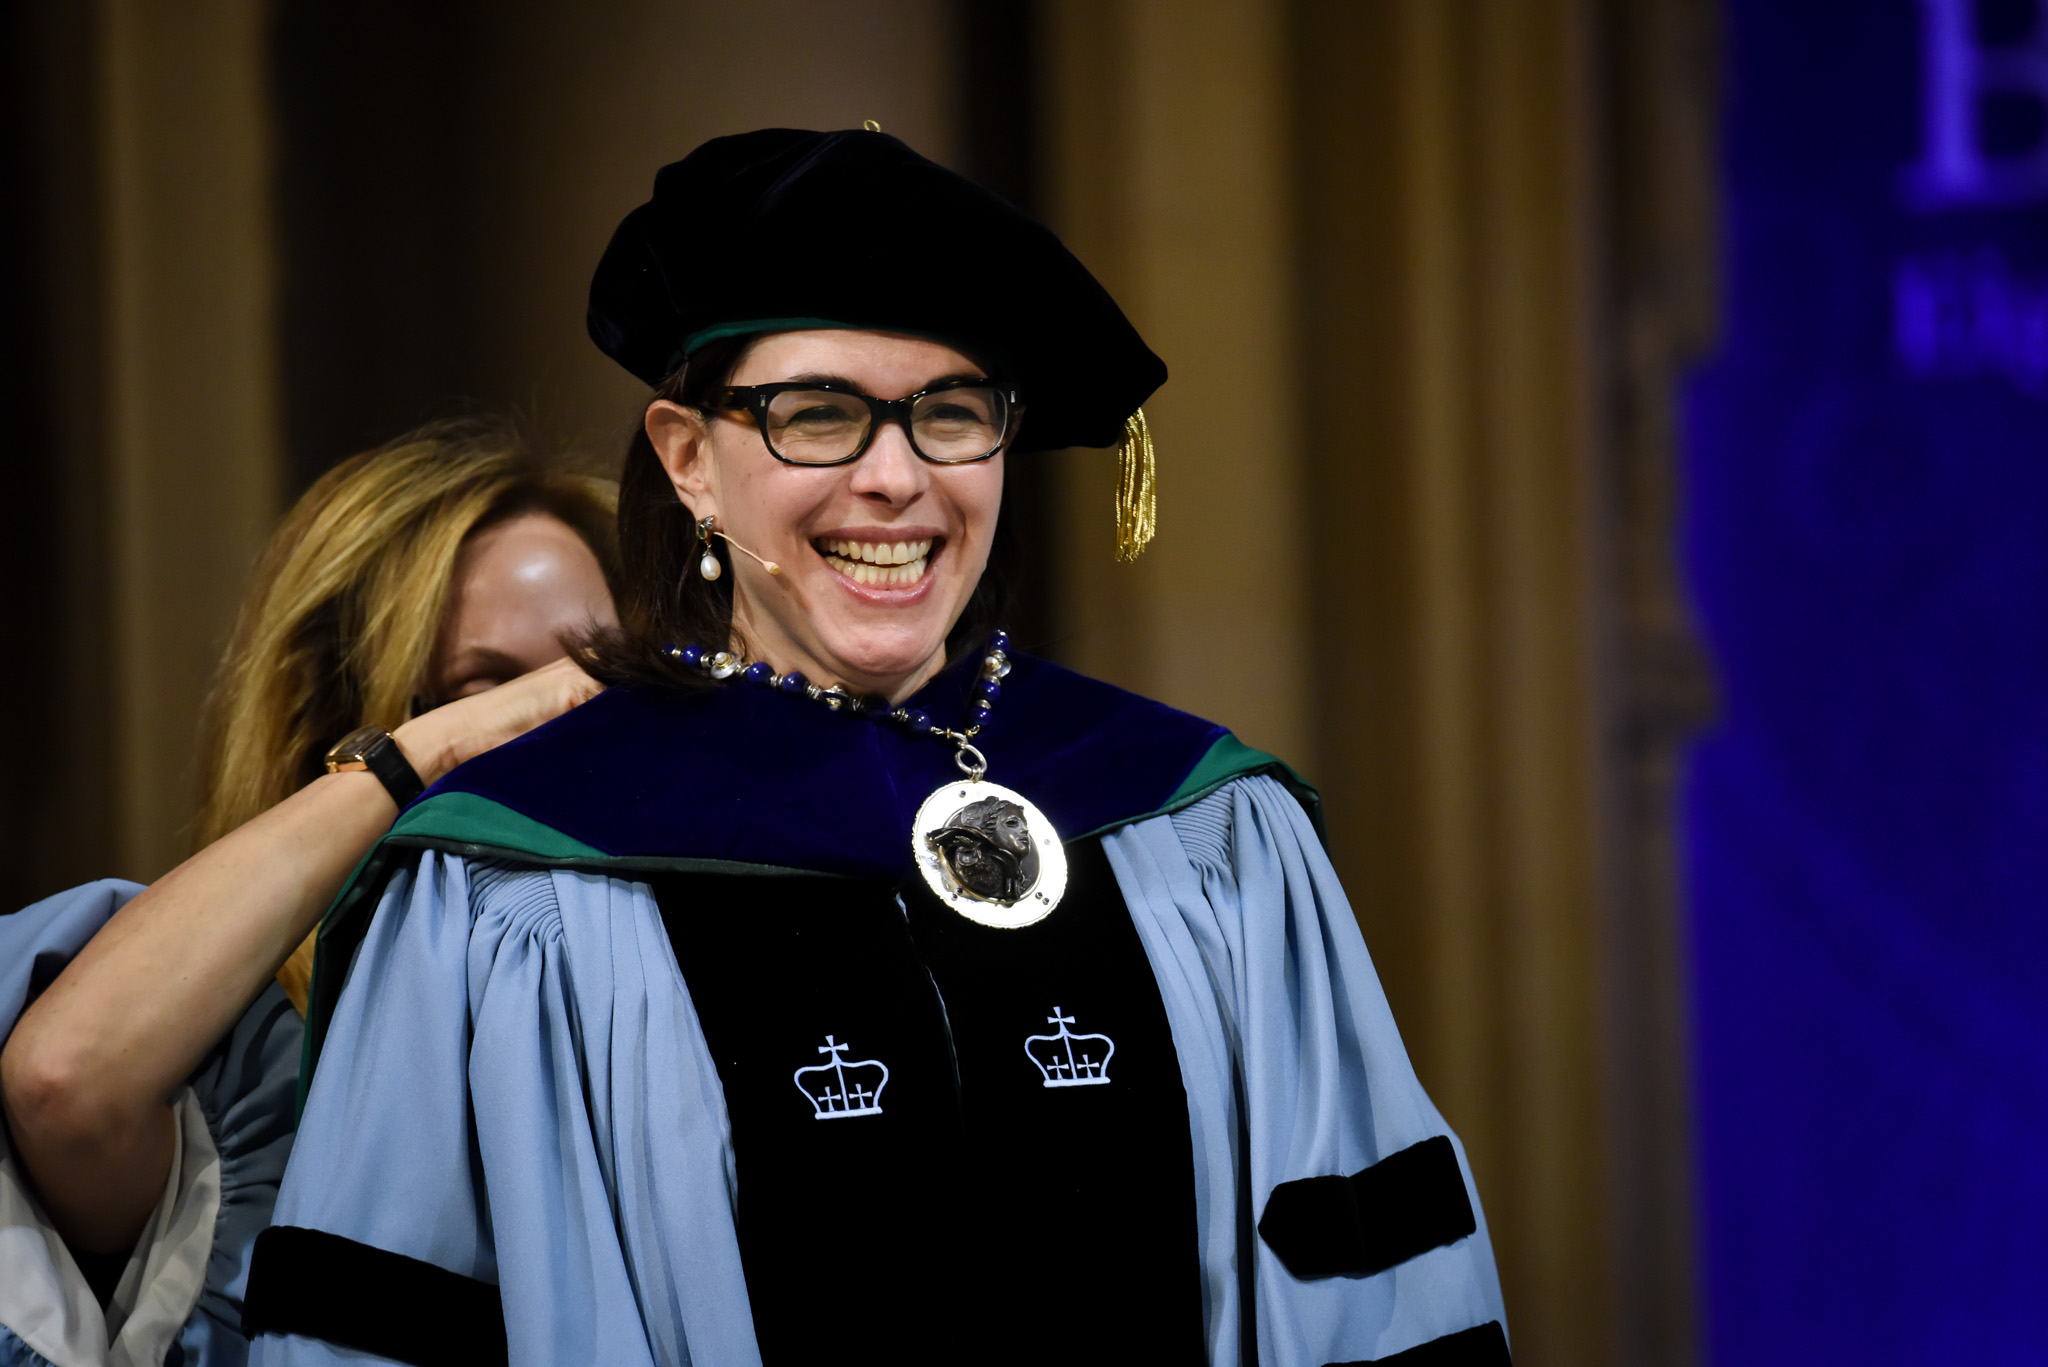 President Beilock receiving the President's Chain of Office at her inauguration in 2018